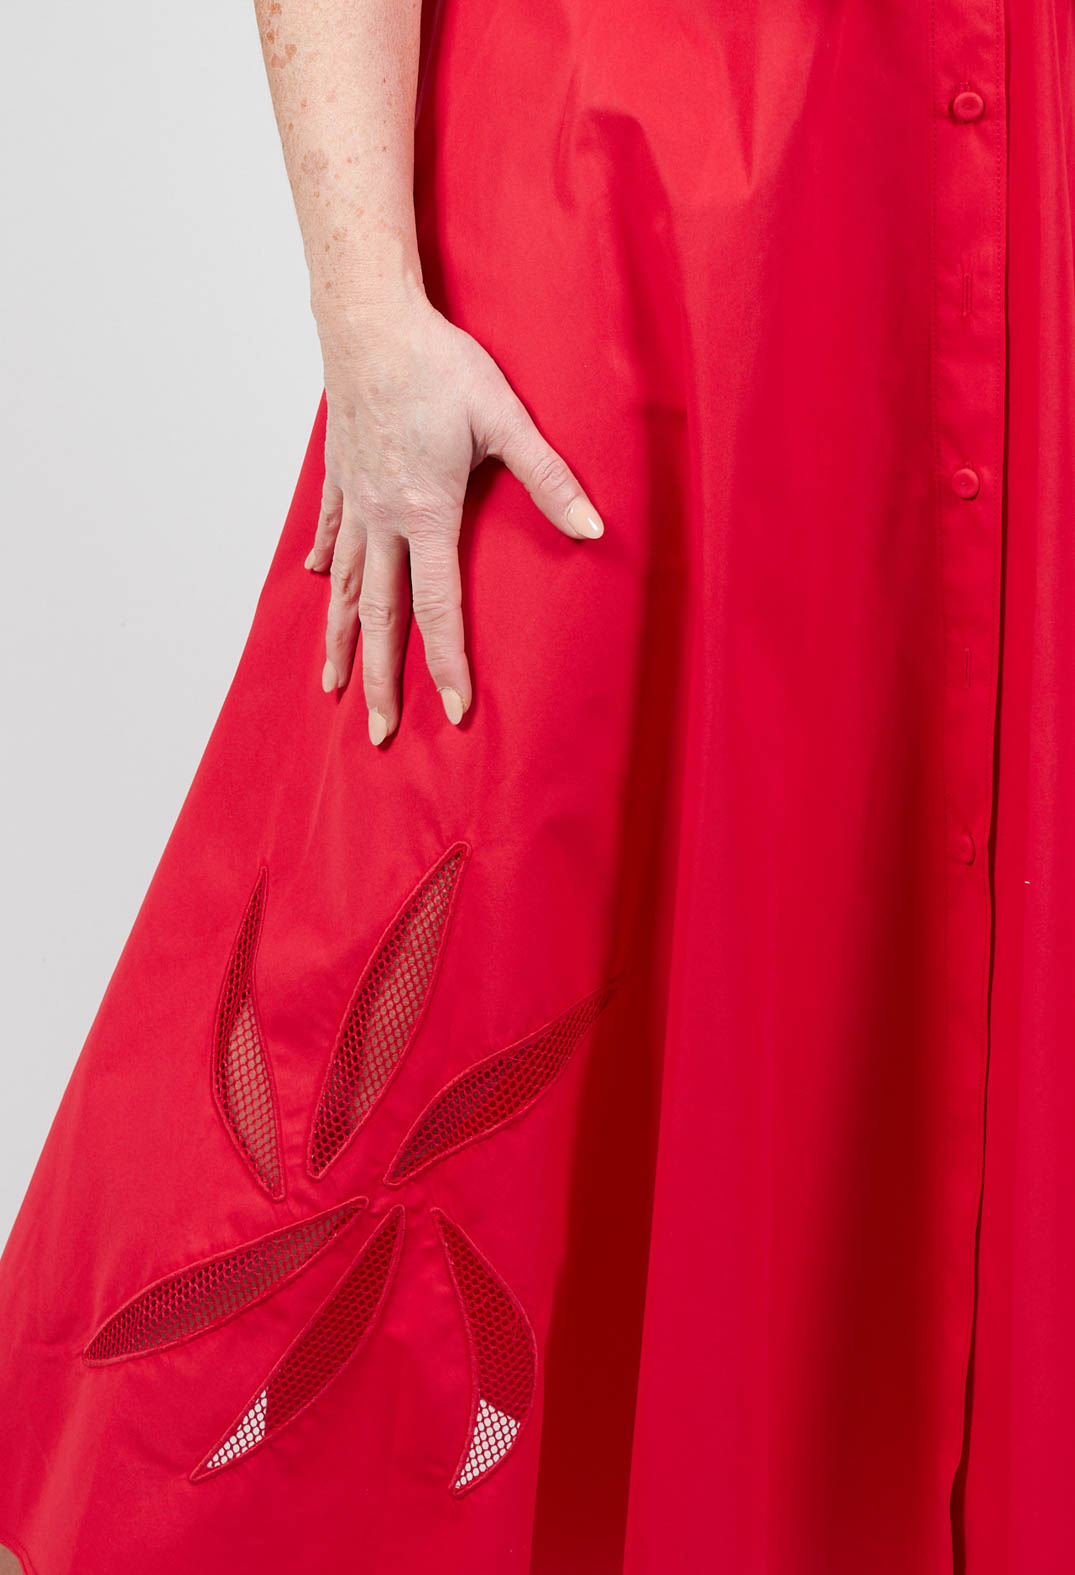 beautiful red collared sleeveless dress close up shot and cut out detailing